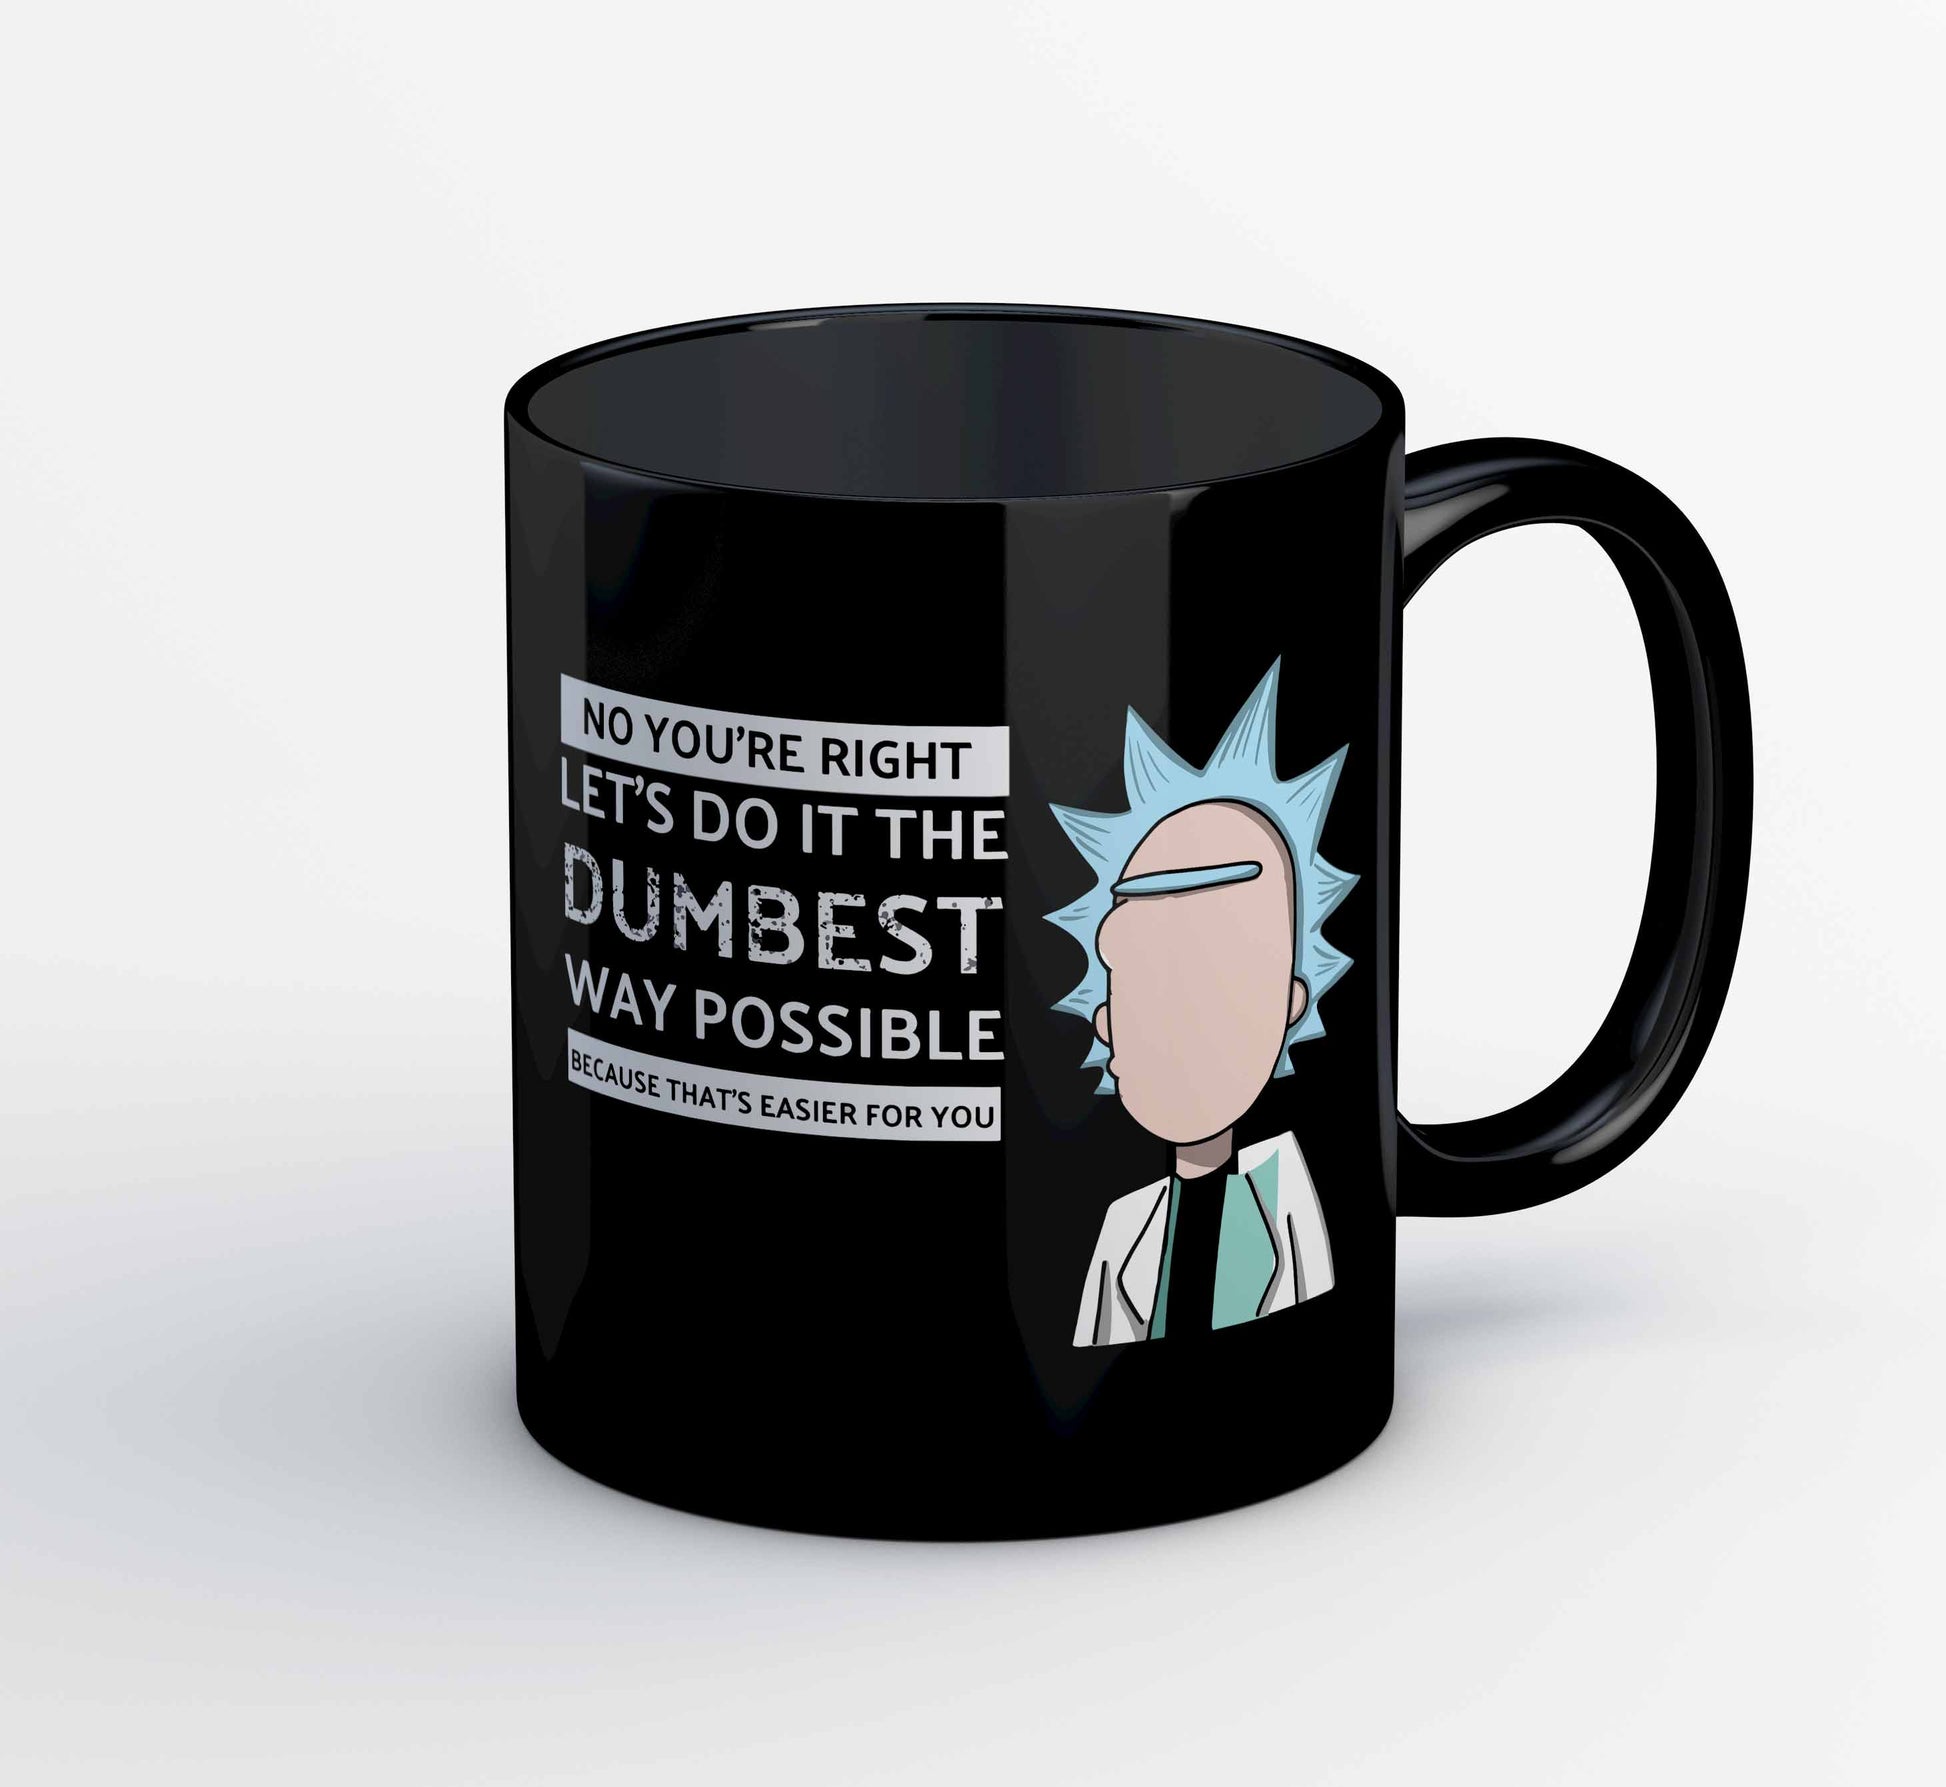 rick and morty dumbest way mug coffee ceramic buy online india the banyan tee tbt men women girls boys unisex  rick and morty online summer beth mr meeseeks jerry quote vector art clothing accessories merchandise